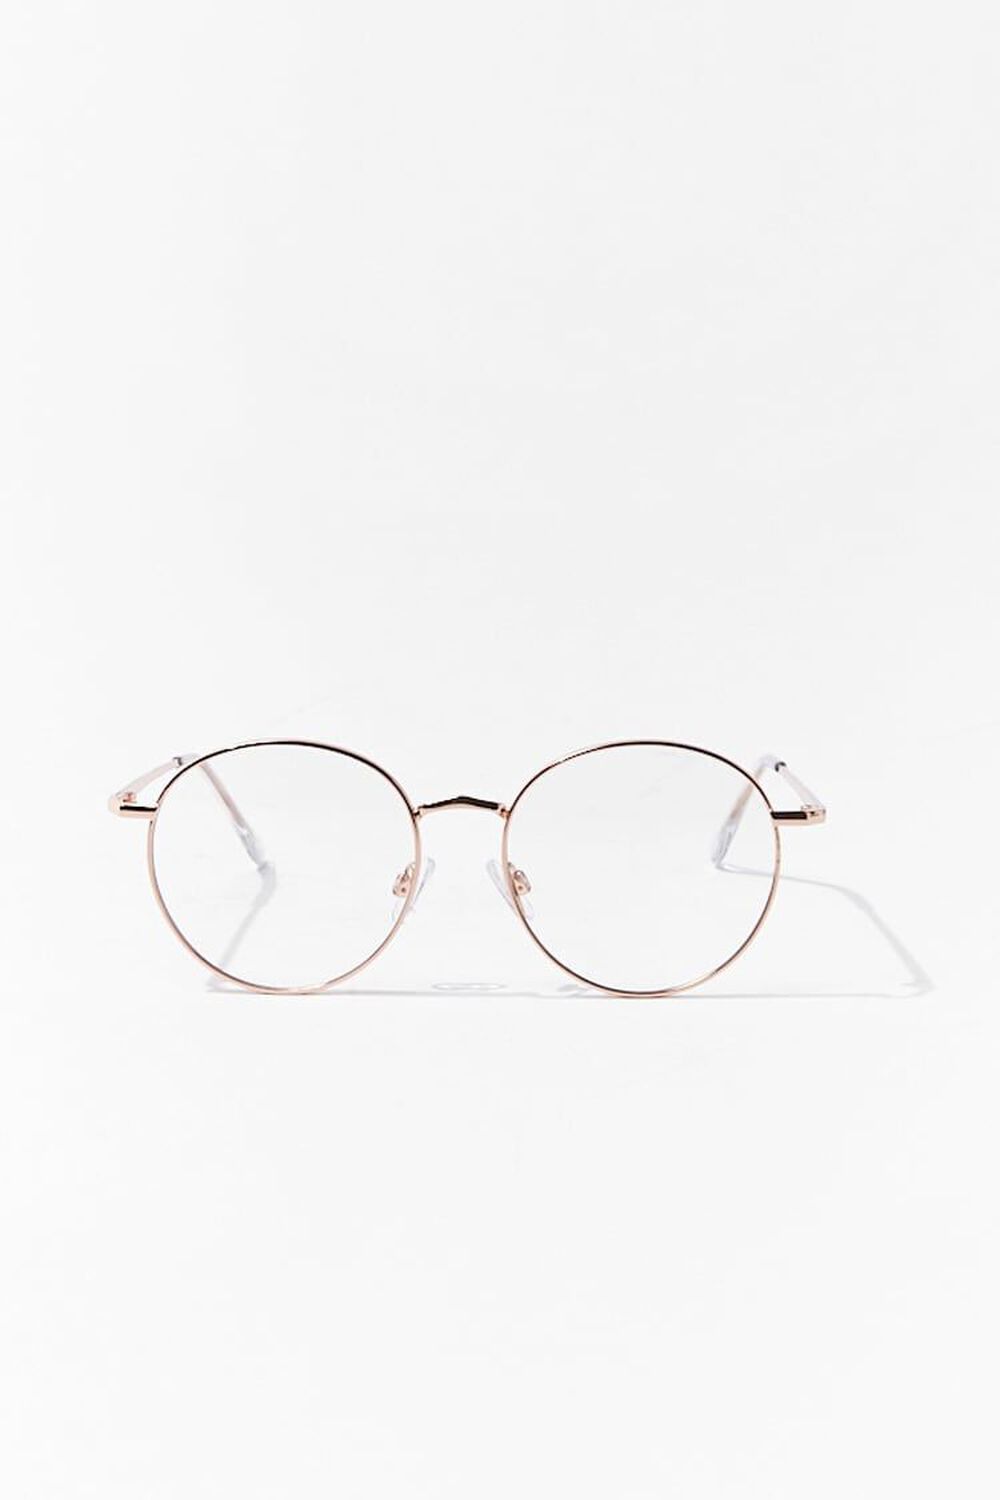 ROSE GOLD/CLEAR Round Reader Glasses, image 1